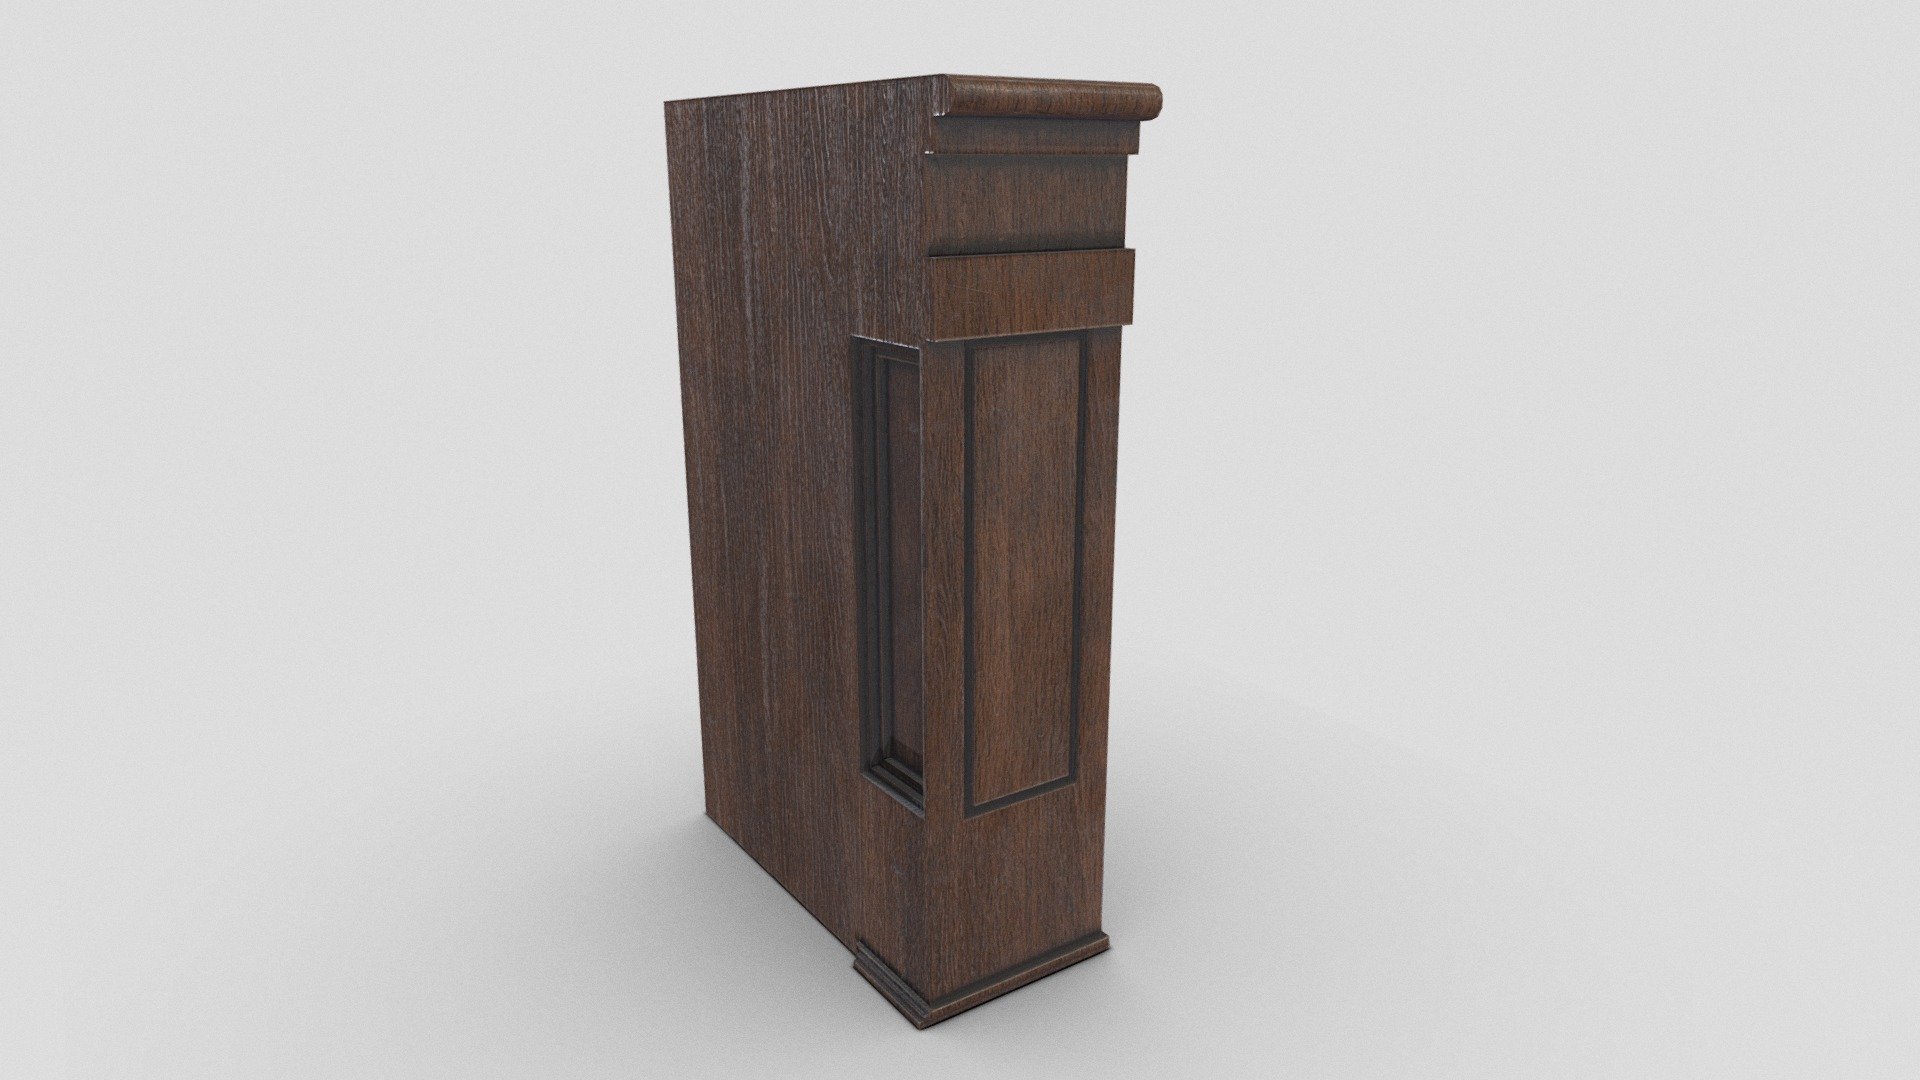 A simple wooden pillar, handy prop to scatter around any interior environment. 

PBR textures @4k - Wooden Pillar - Buy Royalty Free 3D model by Sousinho 3d model